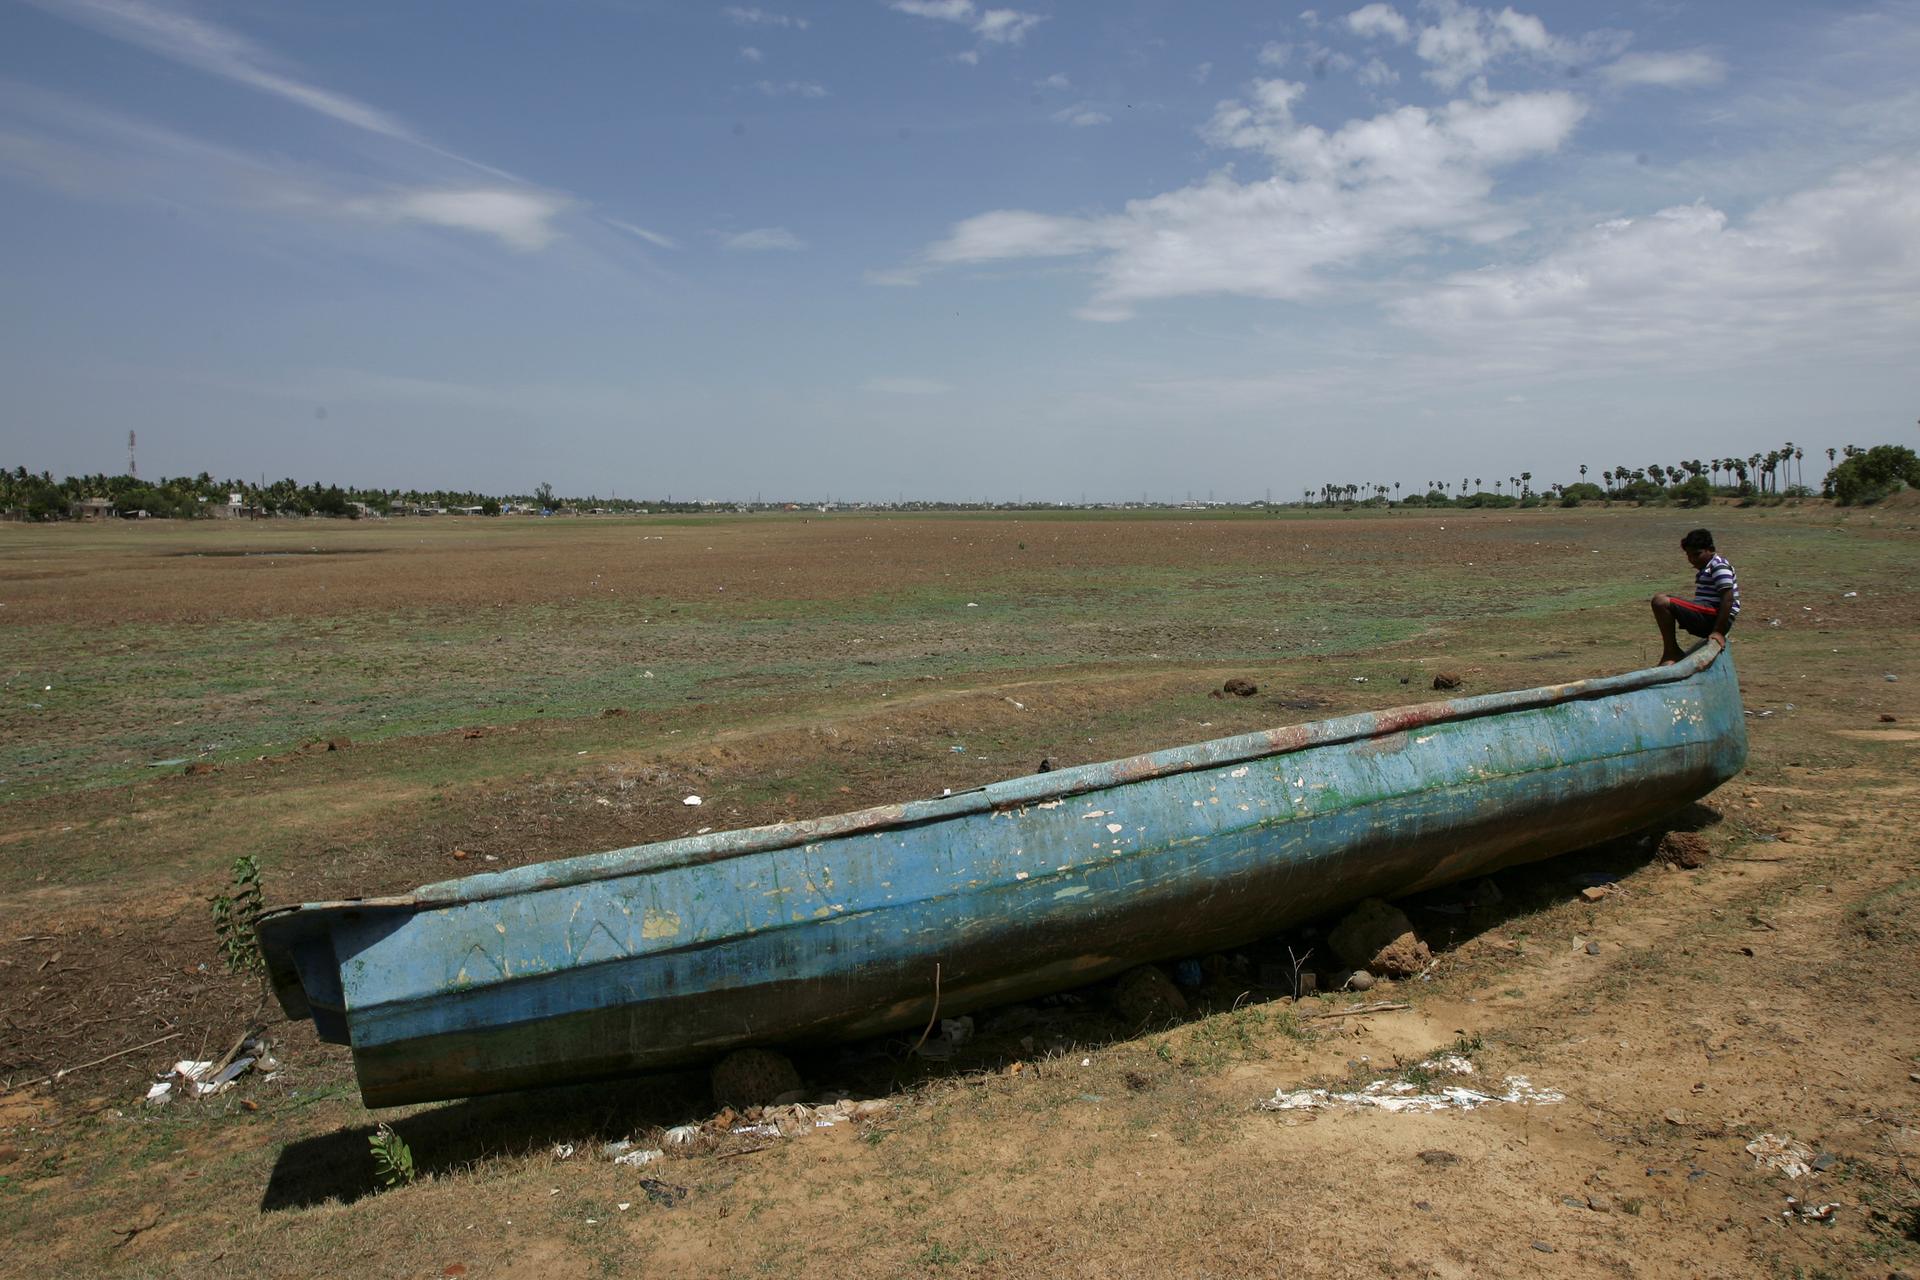 A man sits on a fishing boat stranded on the bed of dried-up lake in Thiruninravur, India, June 29, 2019.